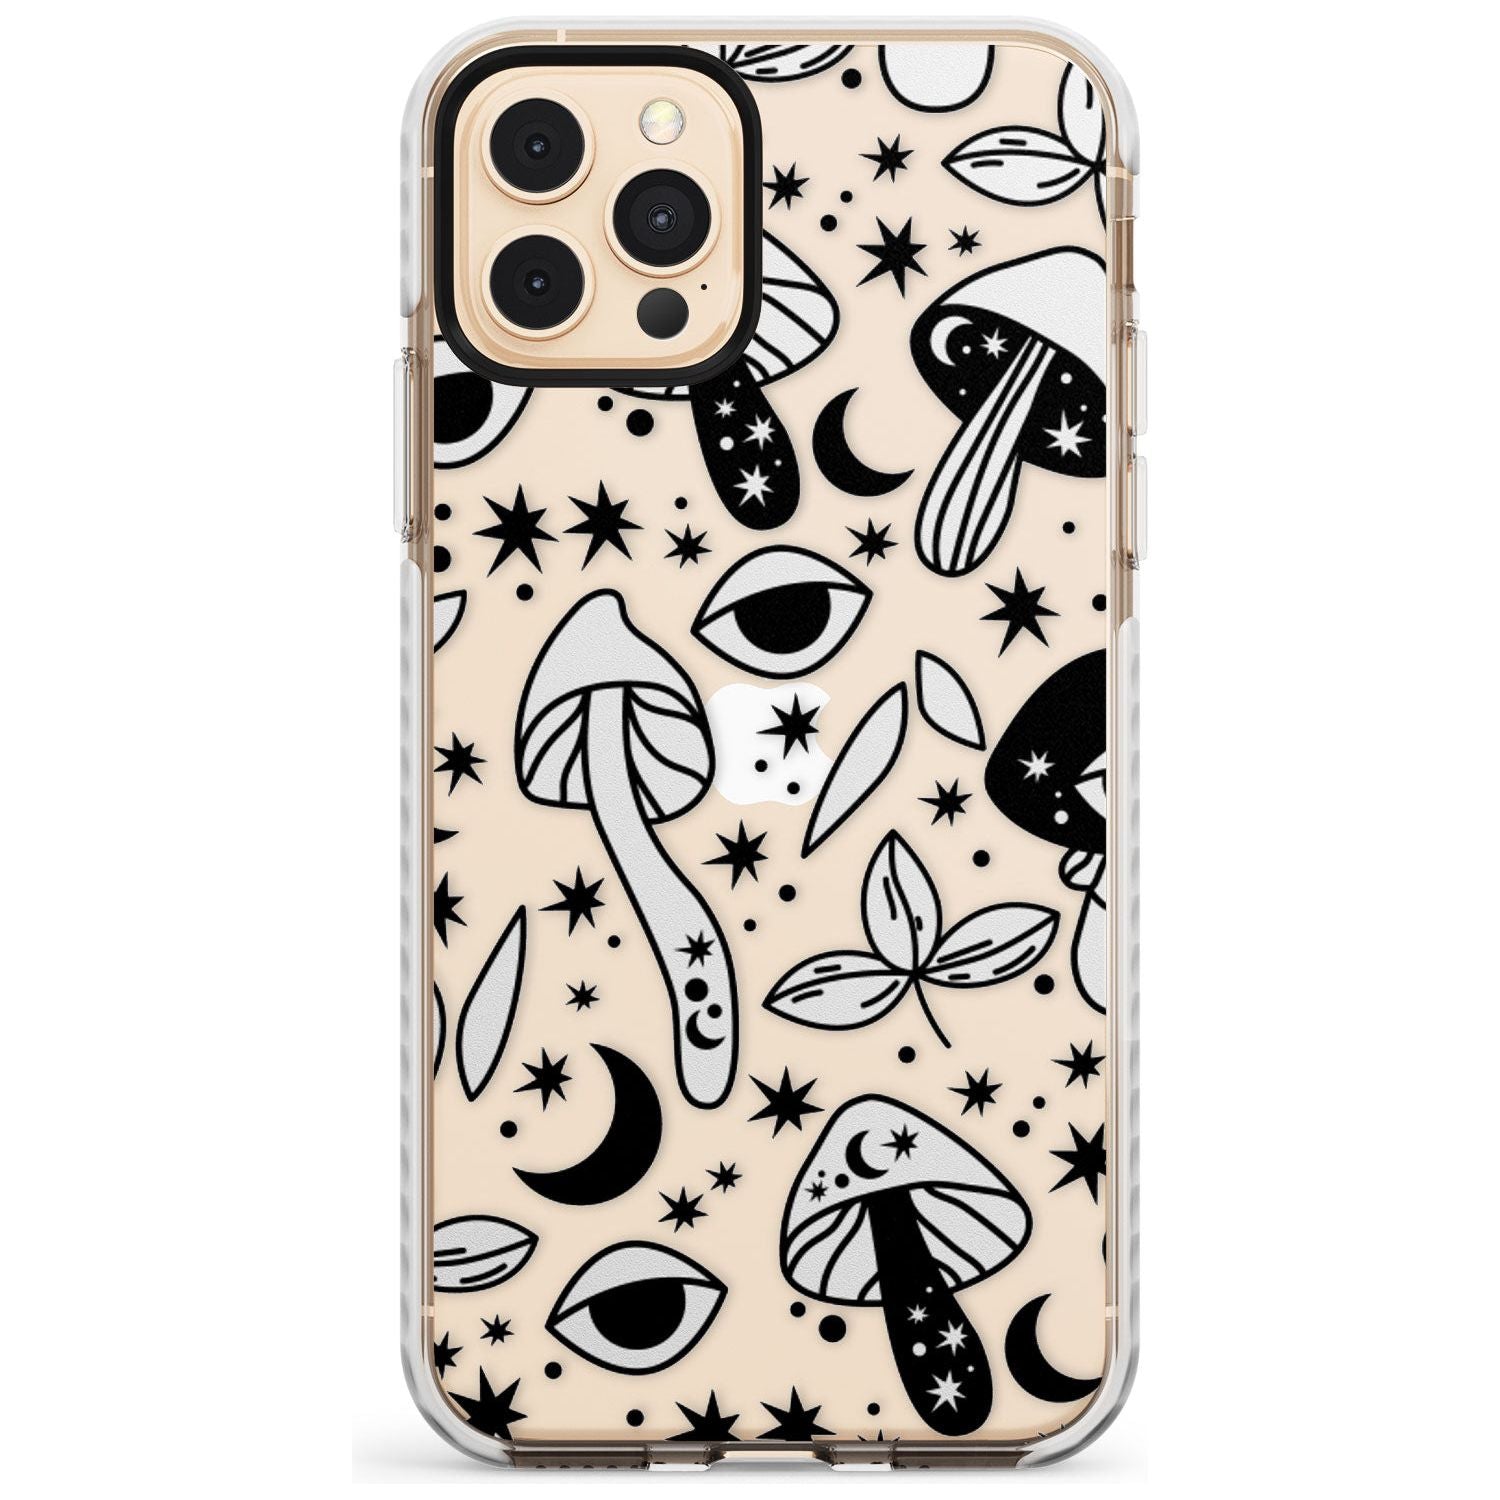 Psychedelic Mushrooms Pattern Impact Phone Case for iPhone 11 Pro Max